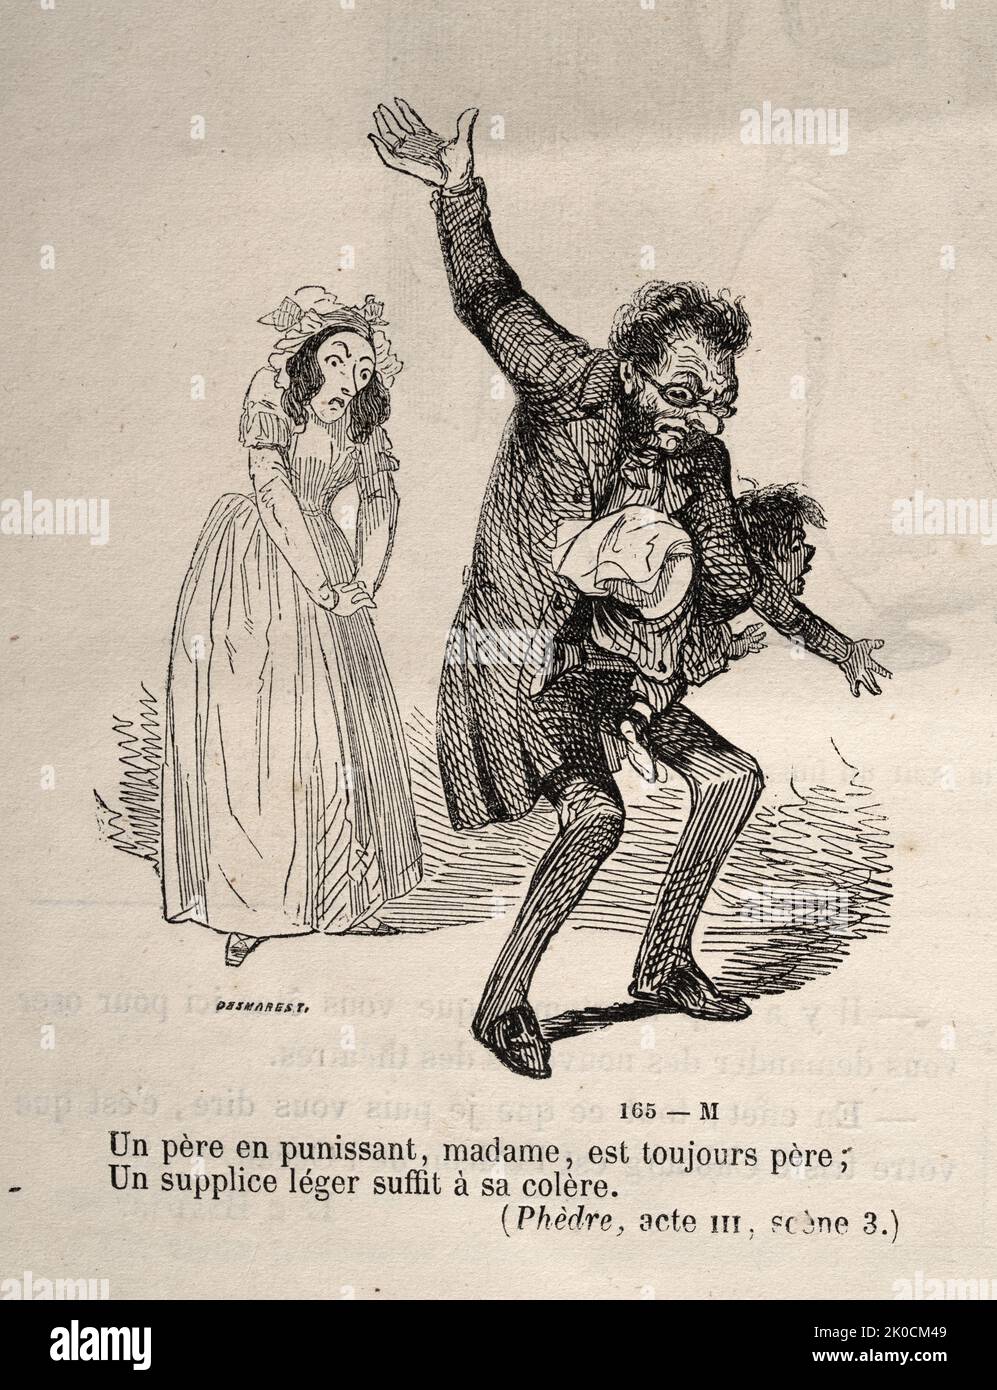 Vintage illustration Father smacking a naughty childs bottom, French, Social History, 1860s, 19th Century. Un pere en punissant, madame, est toujours pere, Un supplice legar suffit a se colere. A father in punishing, madam, is always a father, A legar torture is enough to get angry Stock Photo